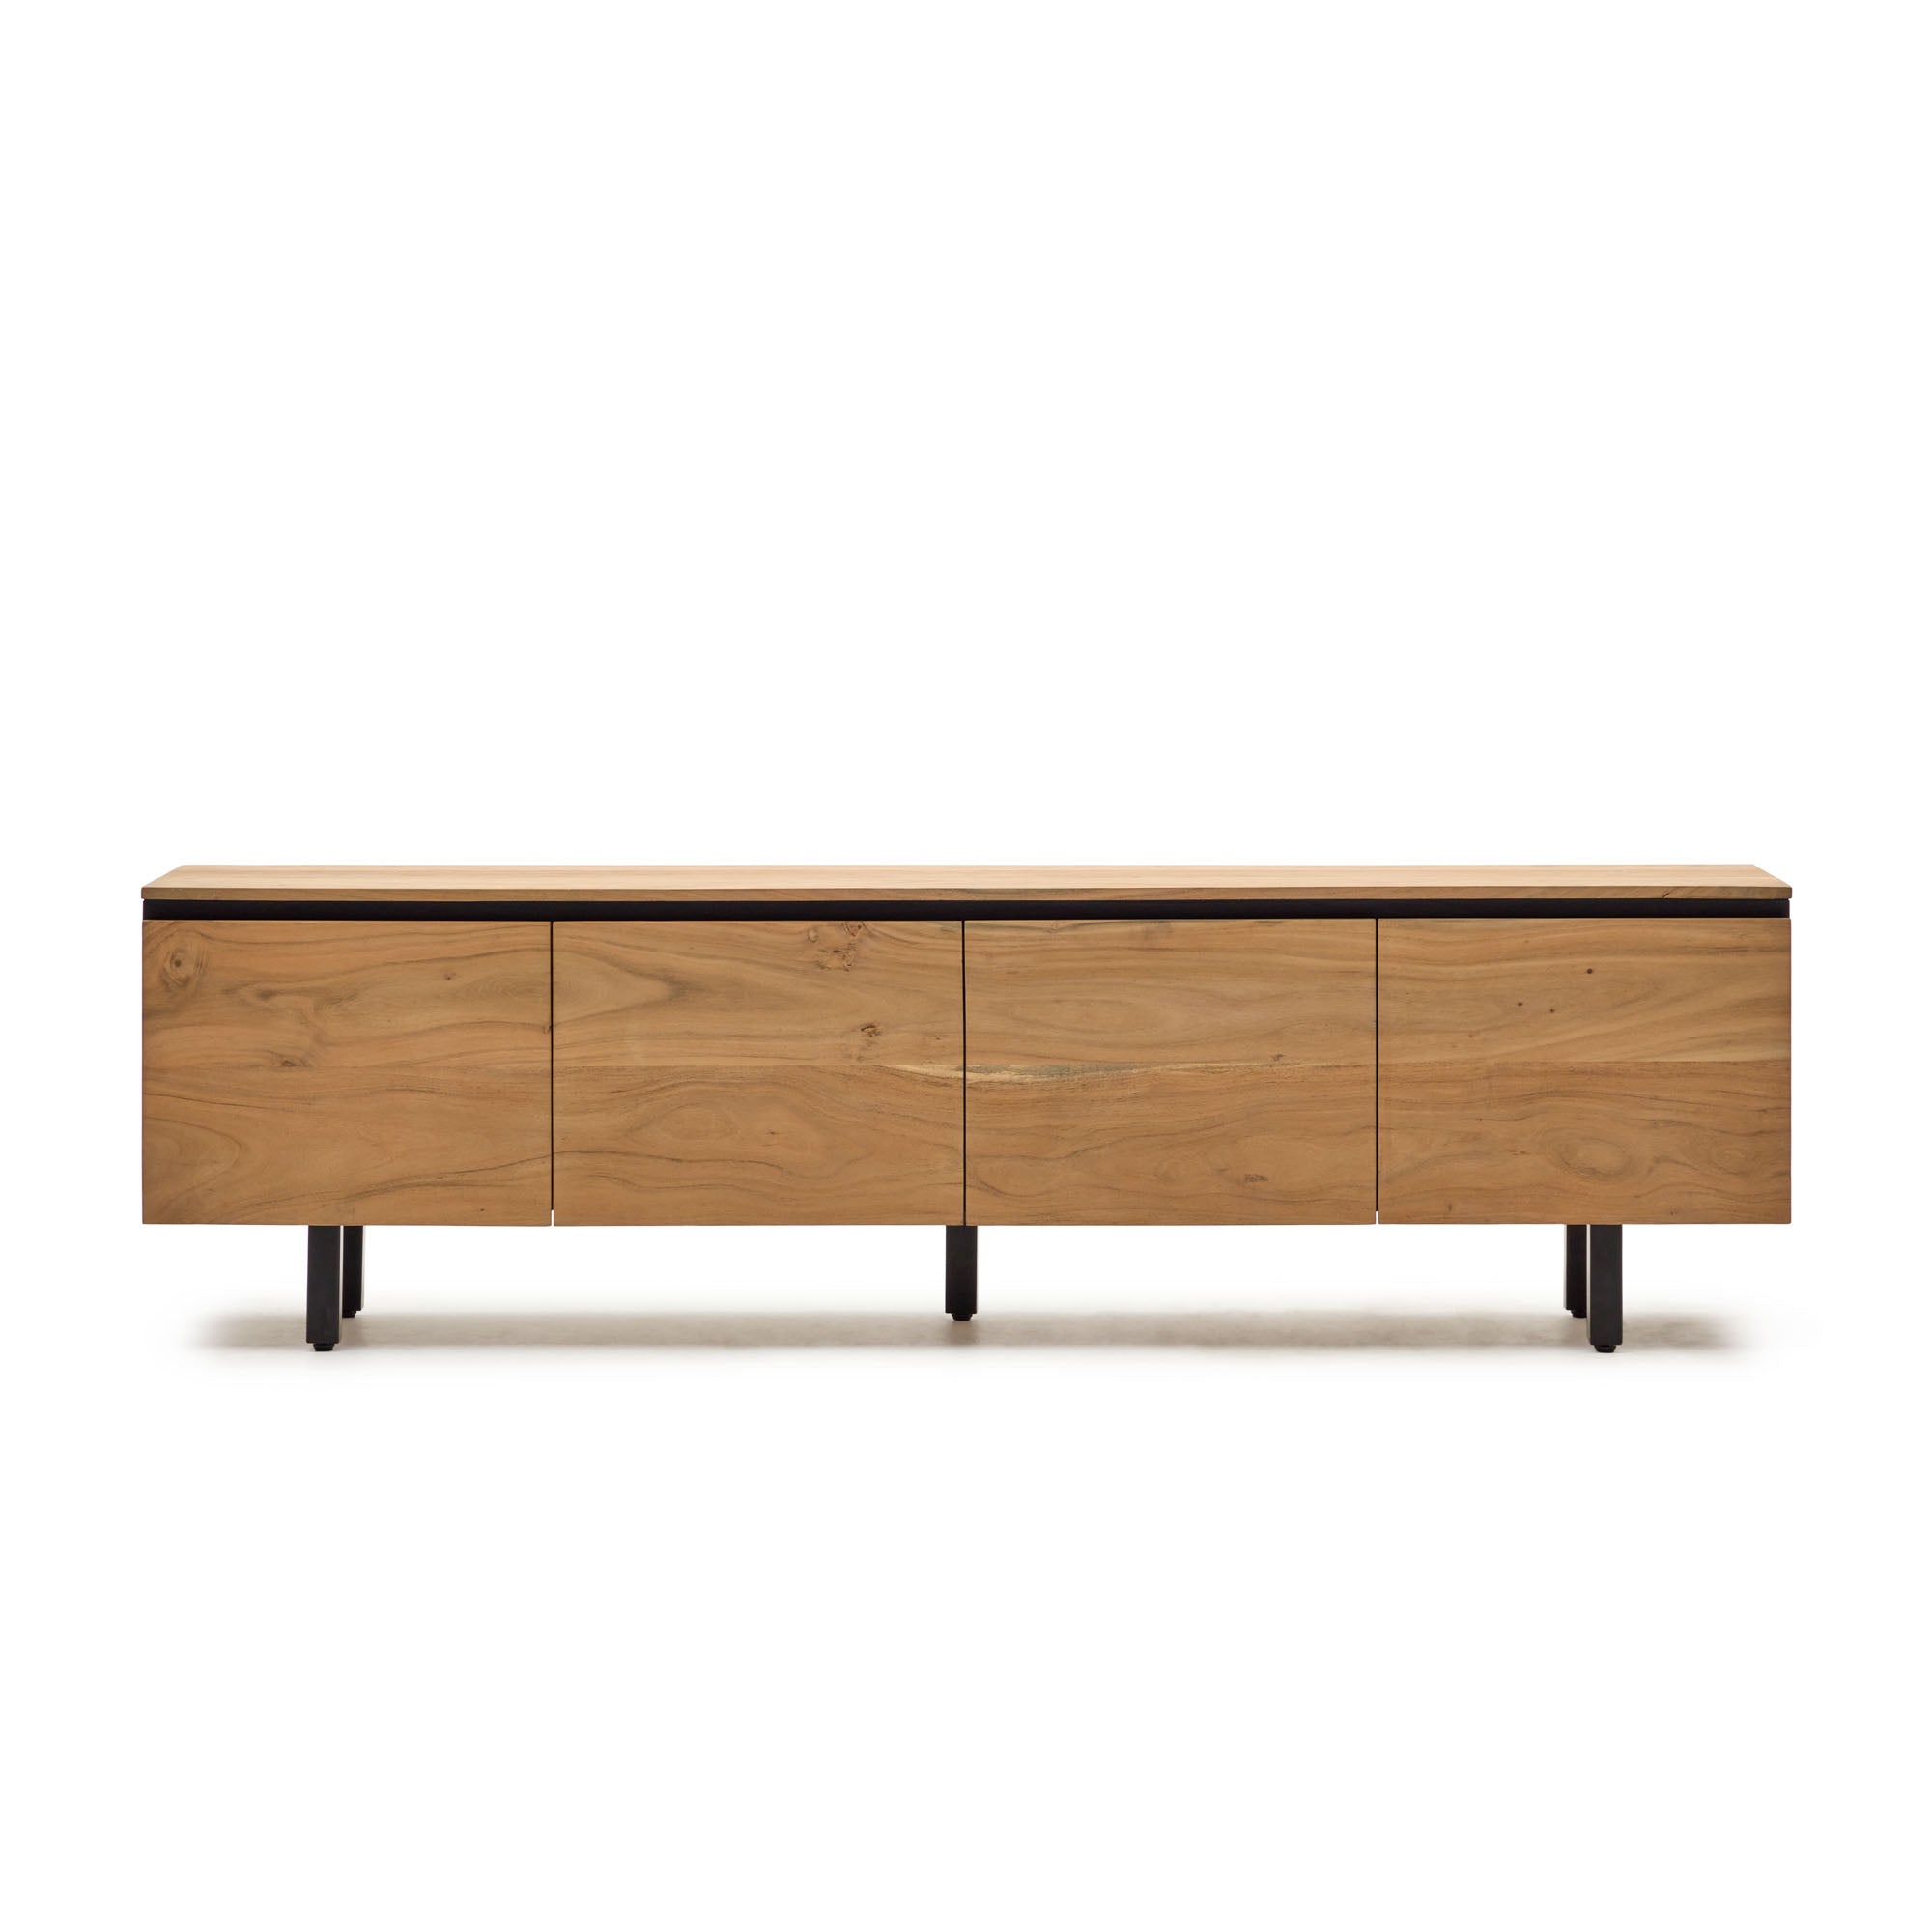 Uxue TV stand with 4 solid acacia wood doors in a natural finish, 200 x 58 cm